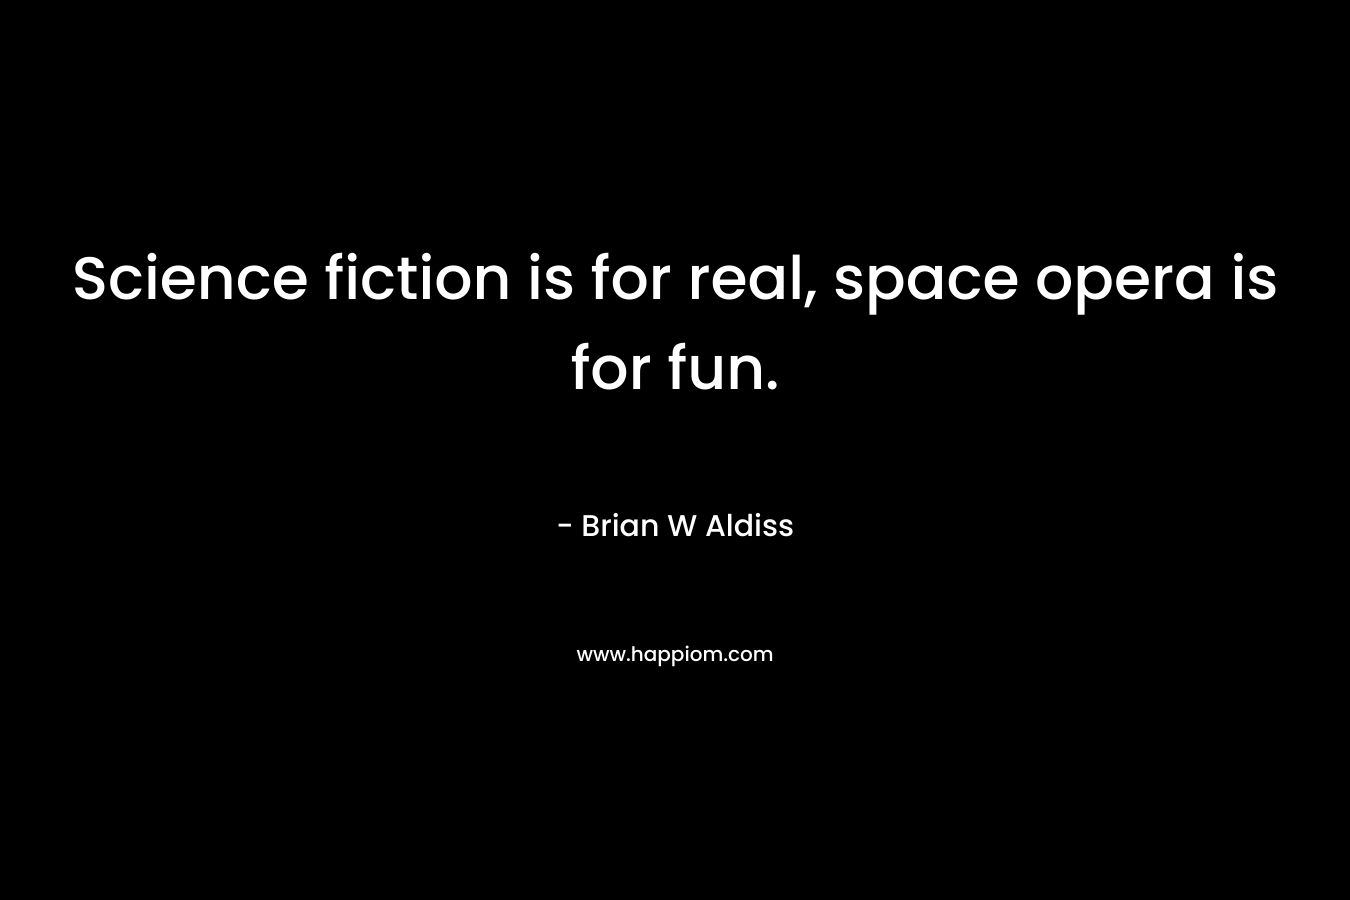 Science fiction is for real, space opera is for fun. – Brian W Aldiss